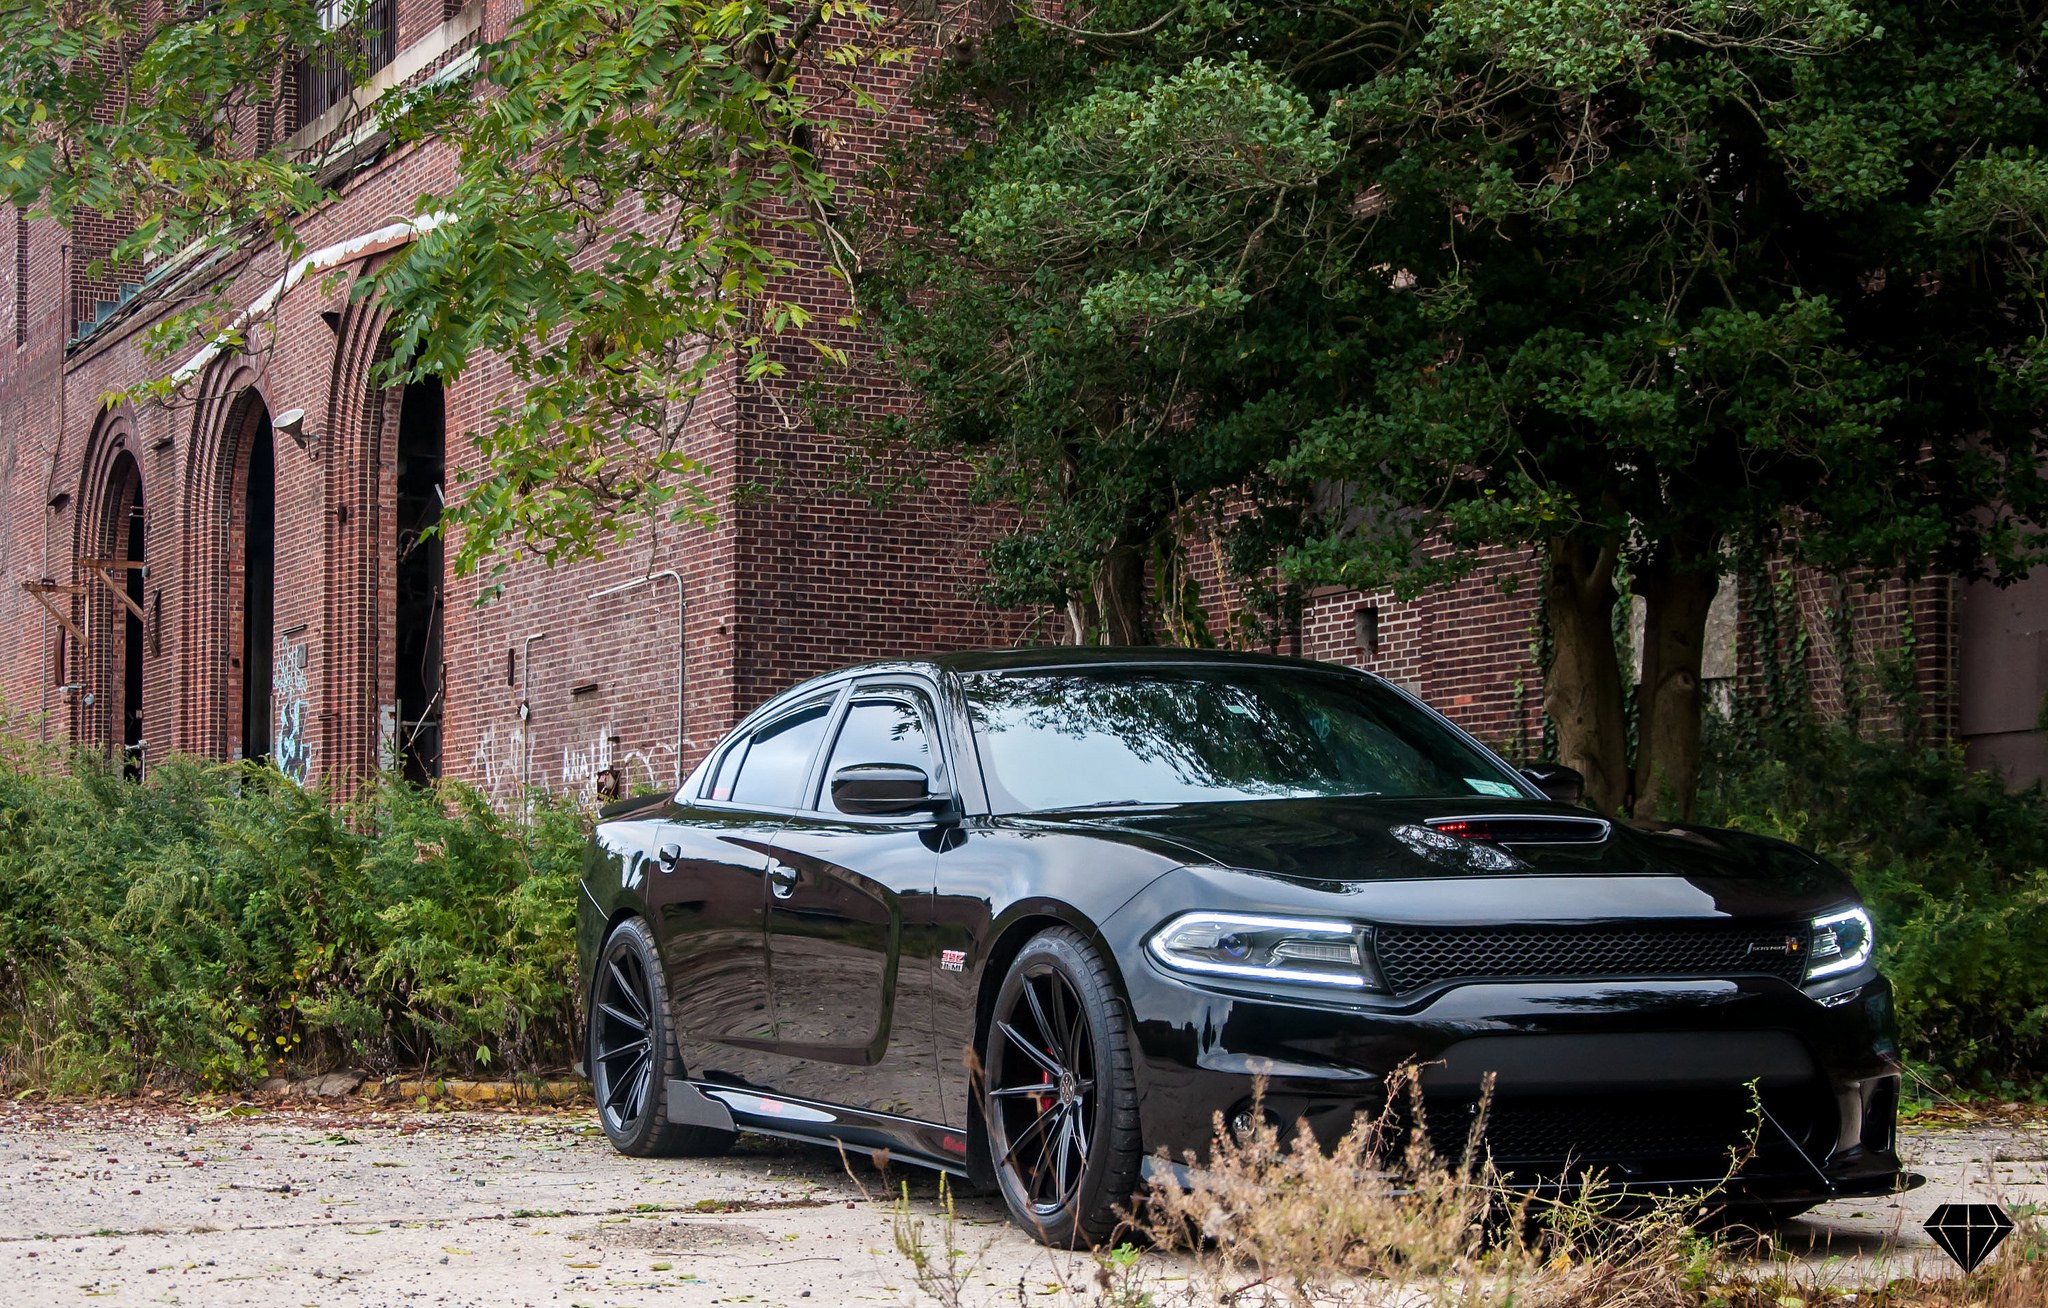 Aftermarket LED-Bar Style Headlights on Black Dodge Charger - Photo by Blaque Diamond Wheels